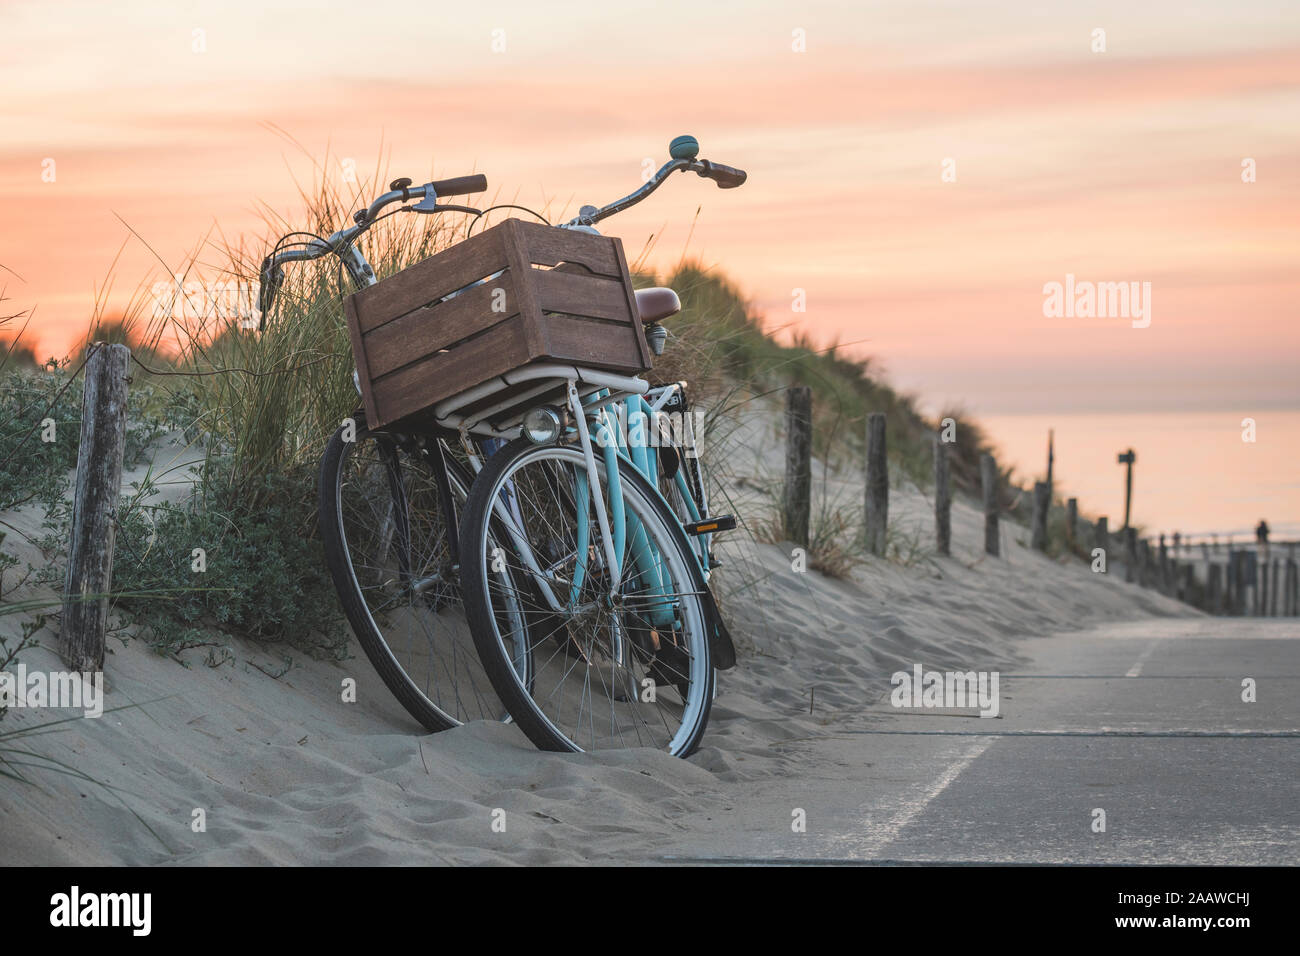 Netherlands, South Holland, Noordwijk, bicycles on sandy beach at sunset Stock Photo